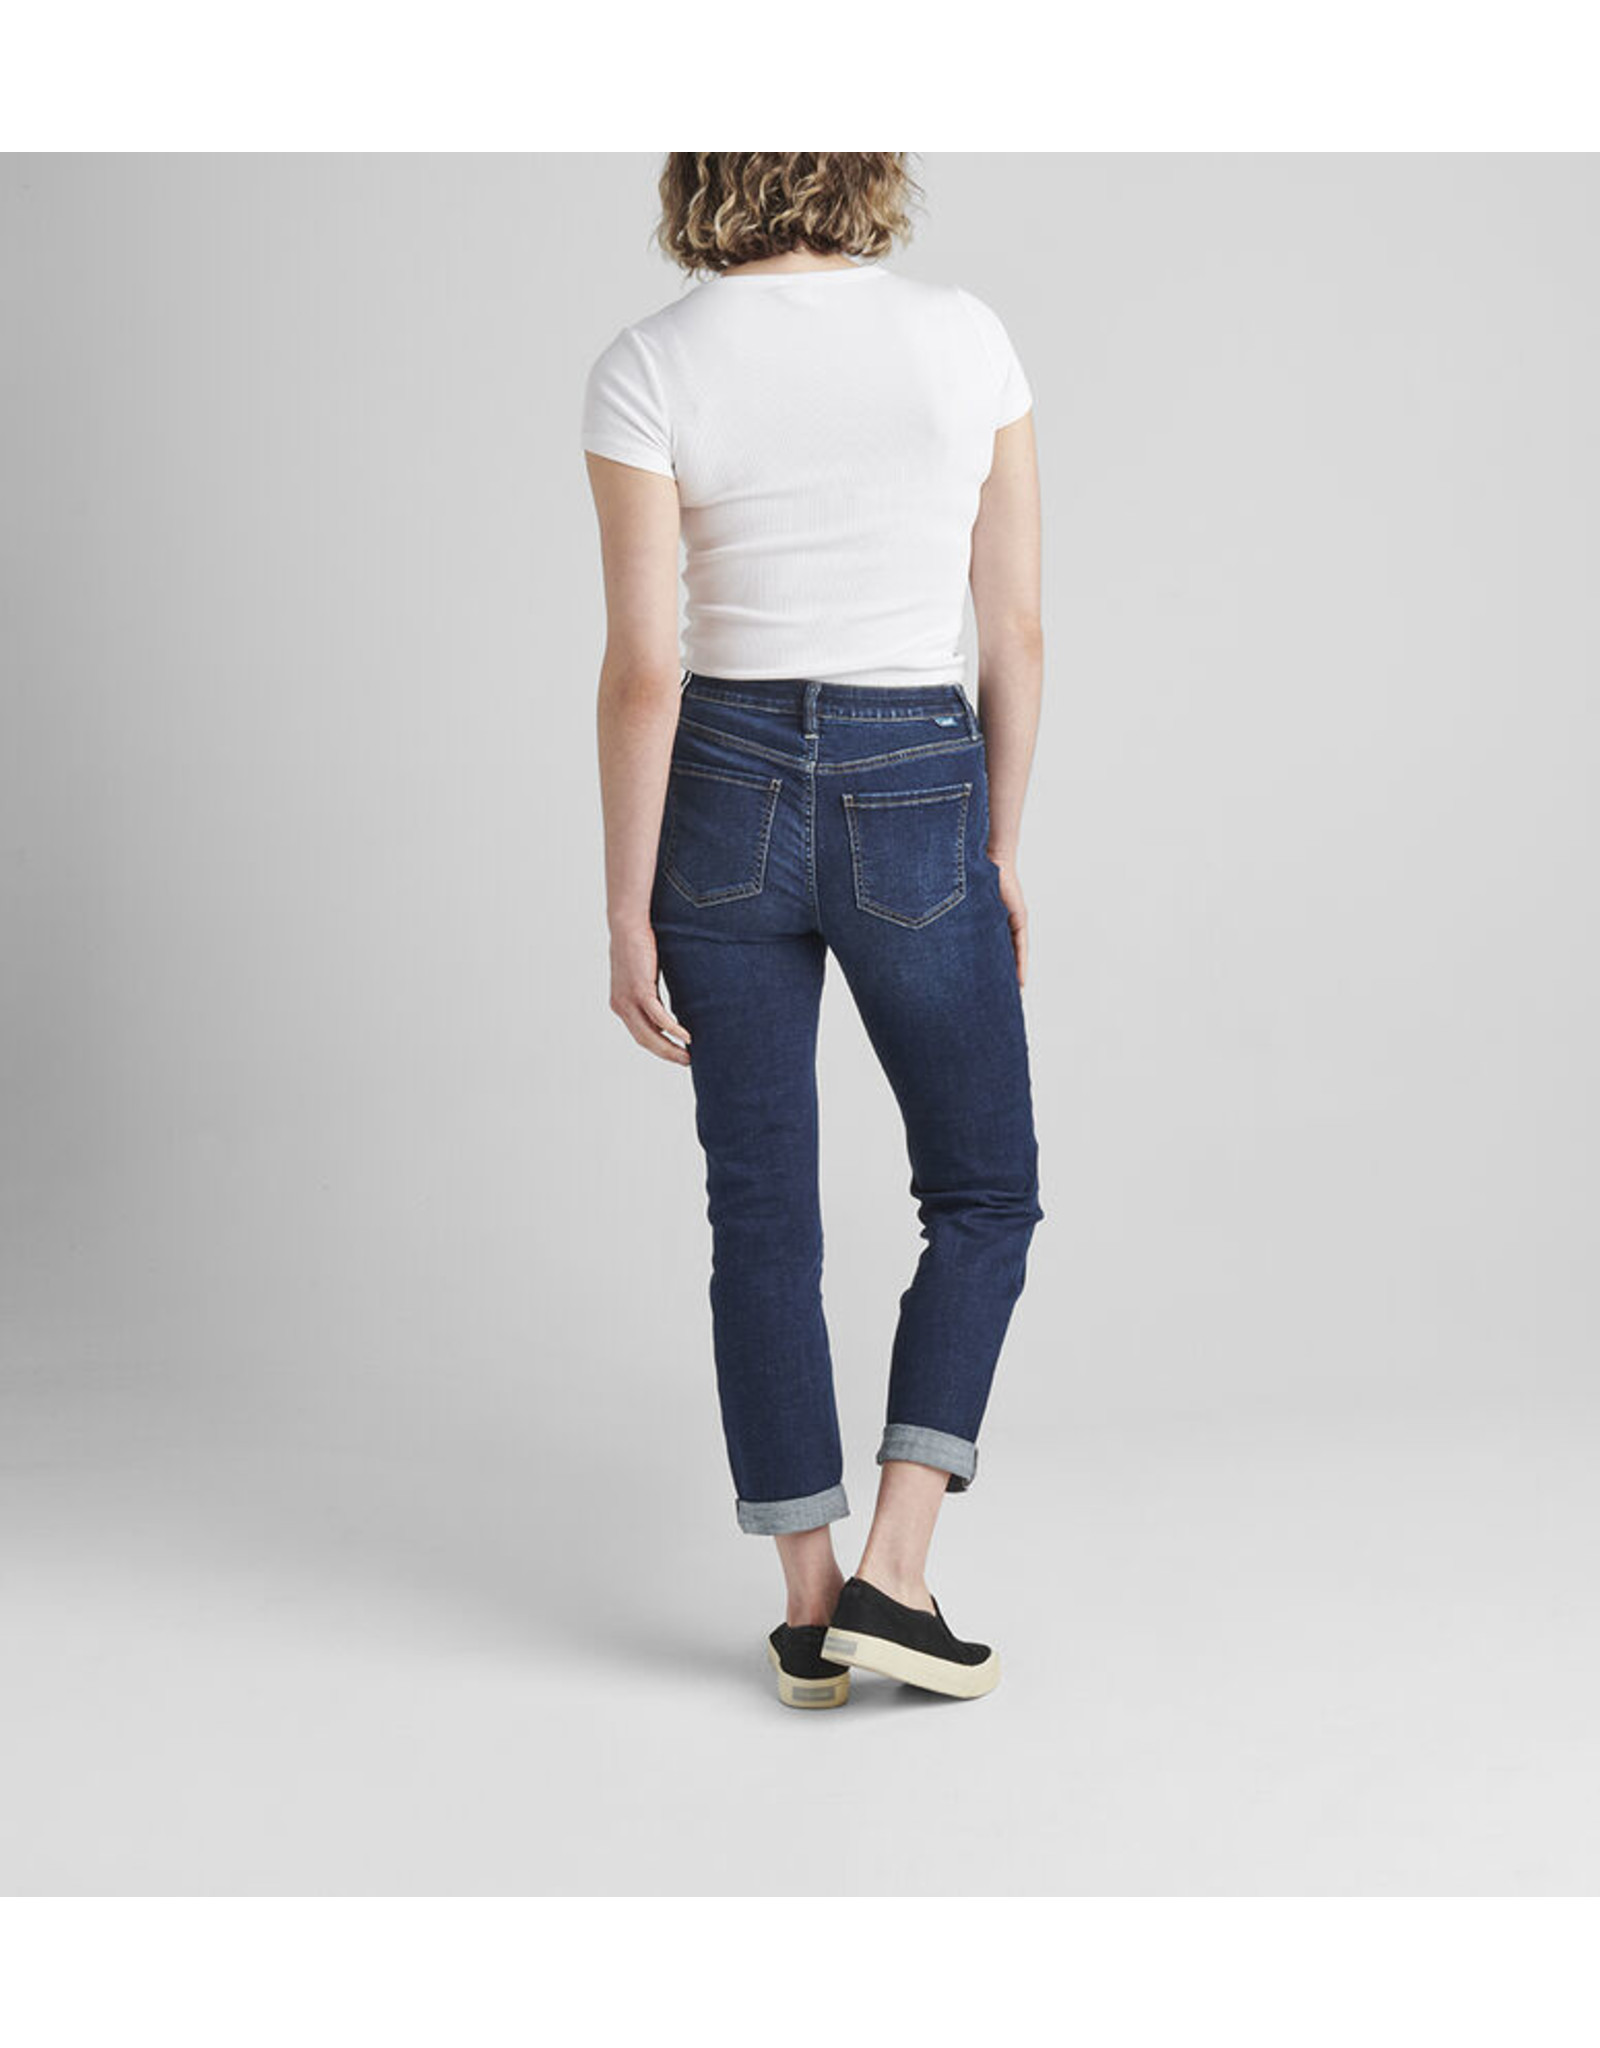 Jag Jeans Carter Mid Rise Girlfriend Jeans